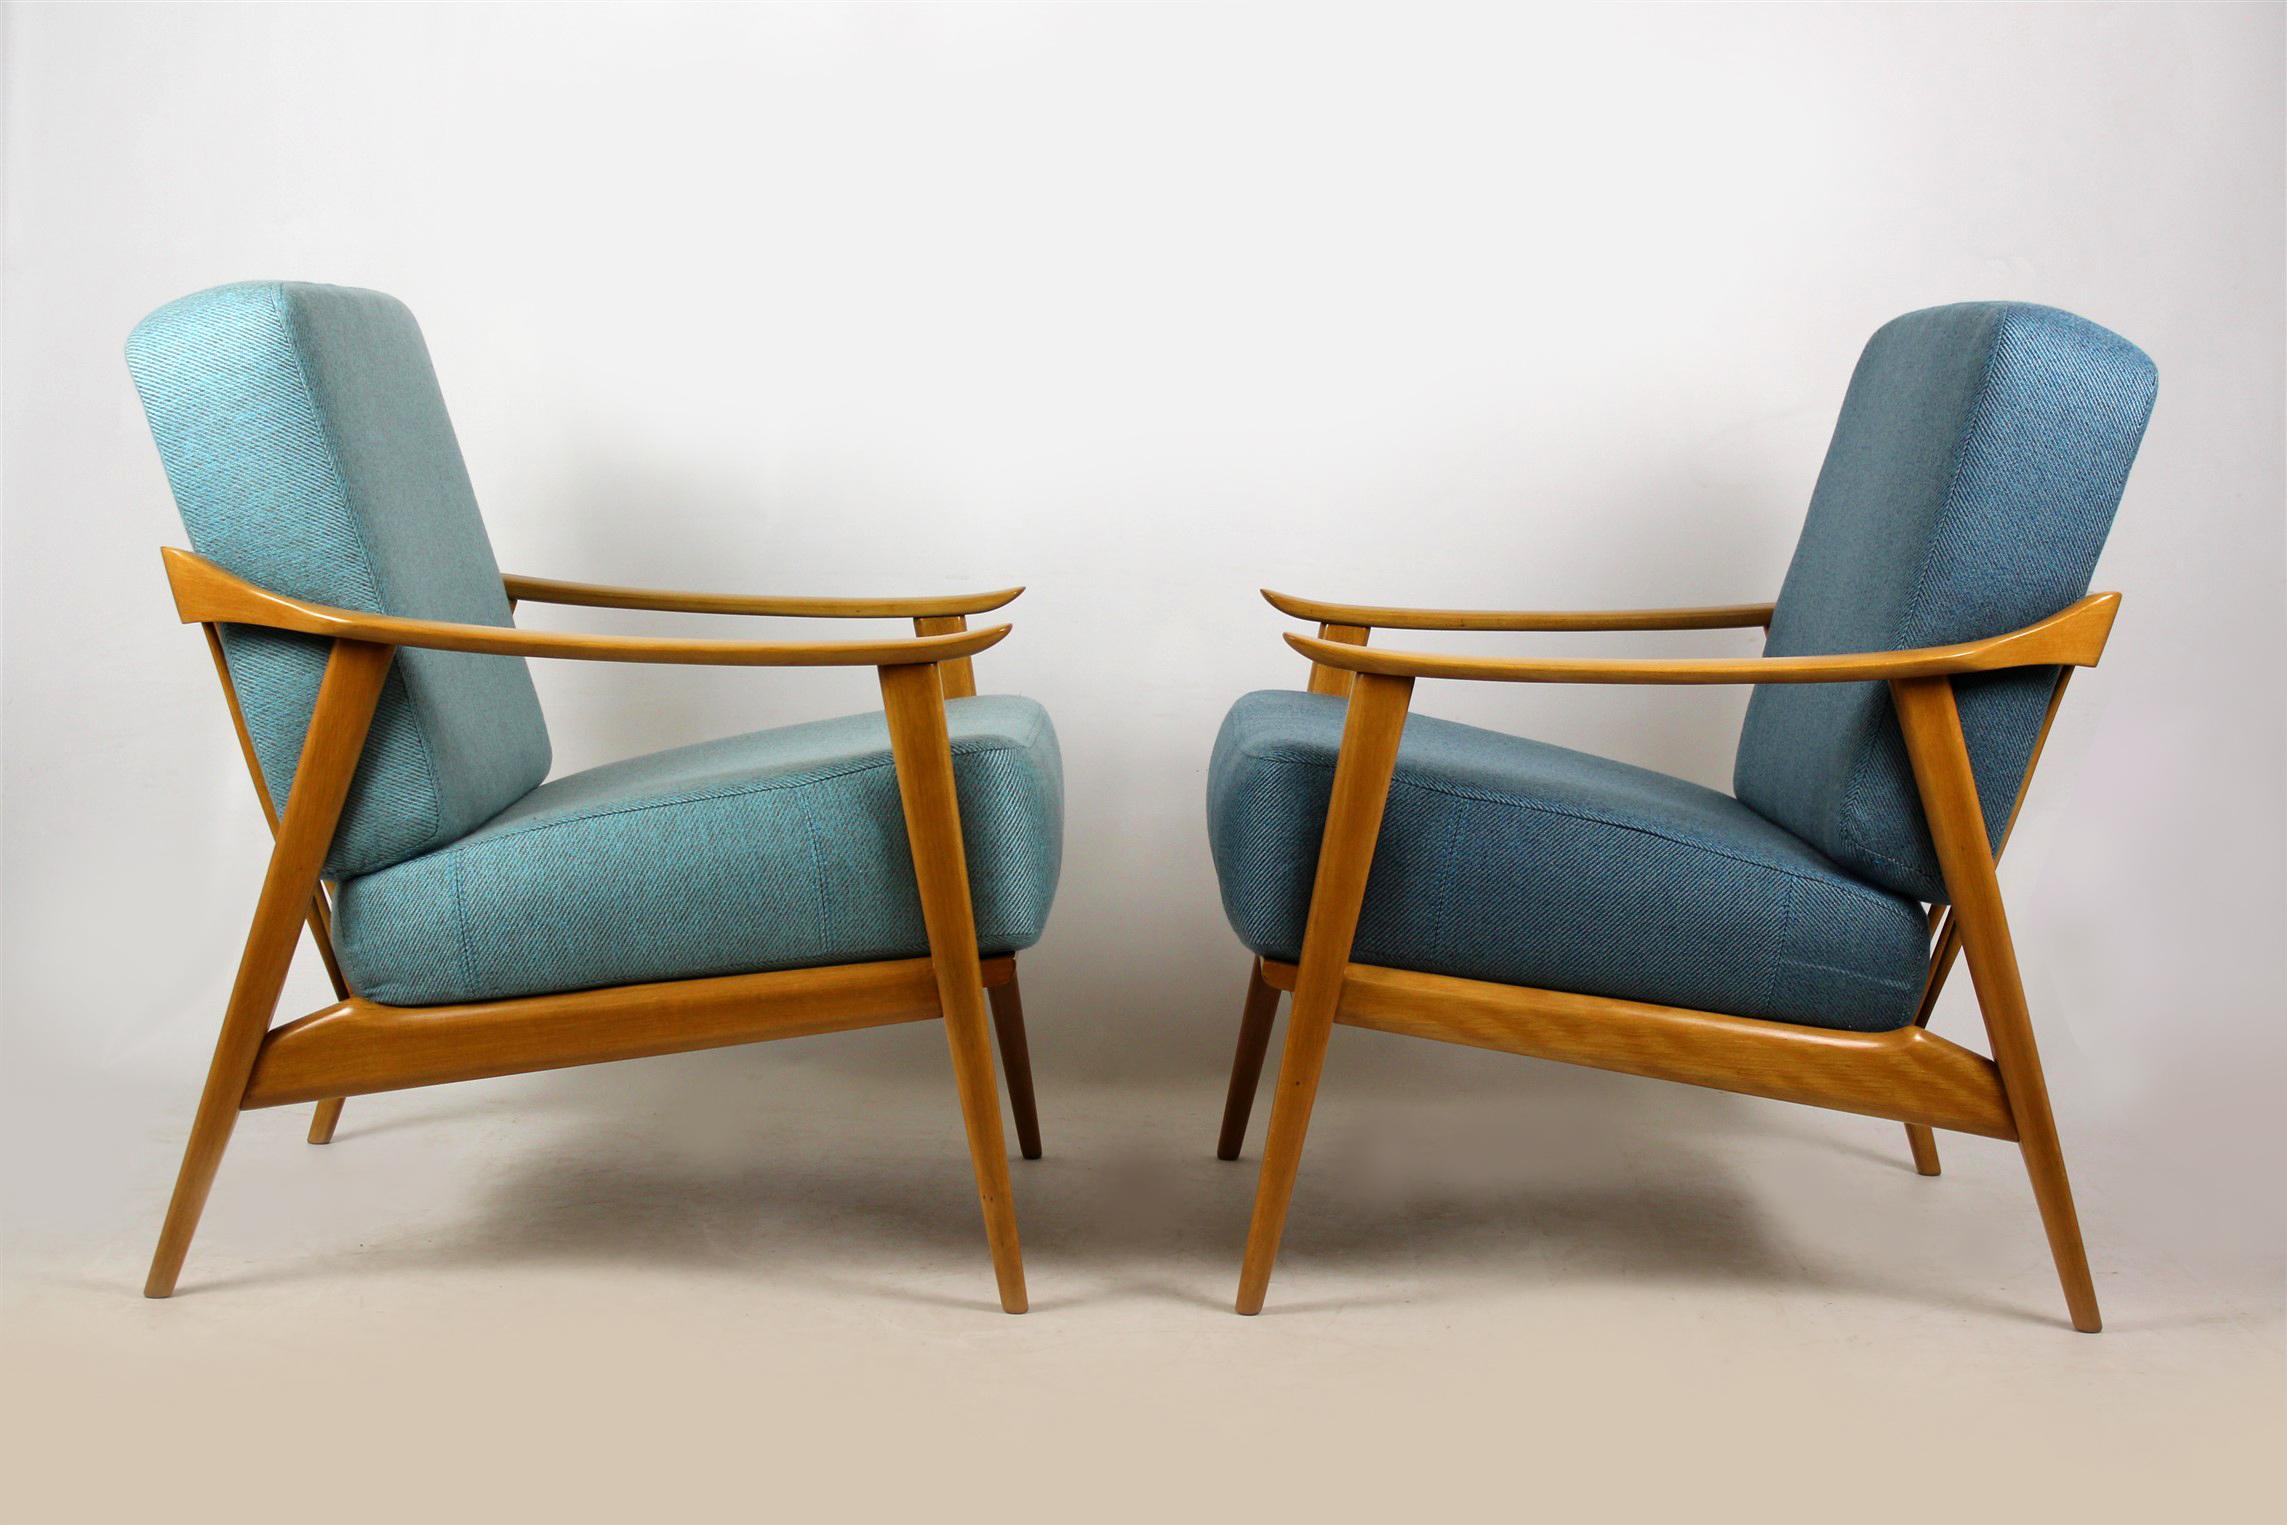 A pair of armchairs from the mid-1960s, made out of beech wood. Feature spring mattresses. Chairs are fully restored (upholstered with new blue and turquoise fabric, satin lacquered woodwork).